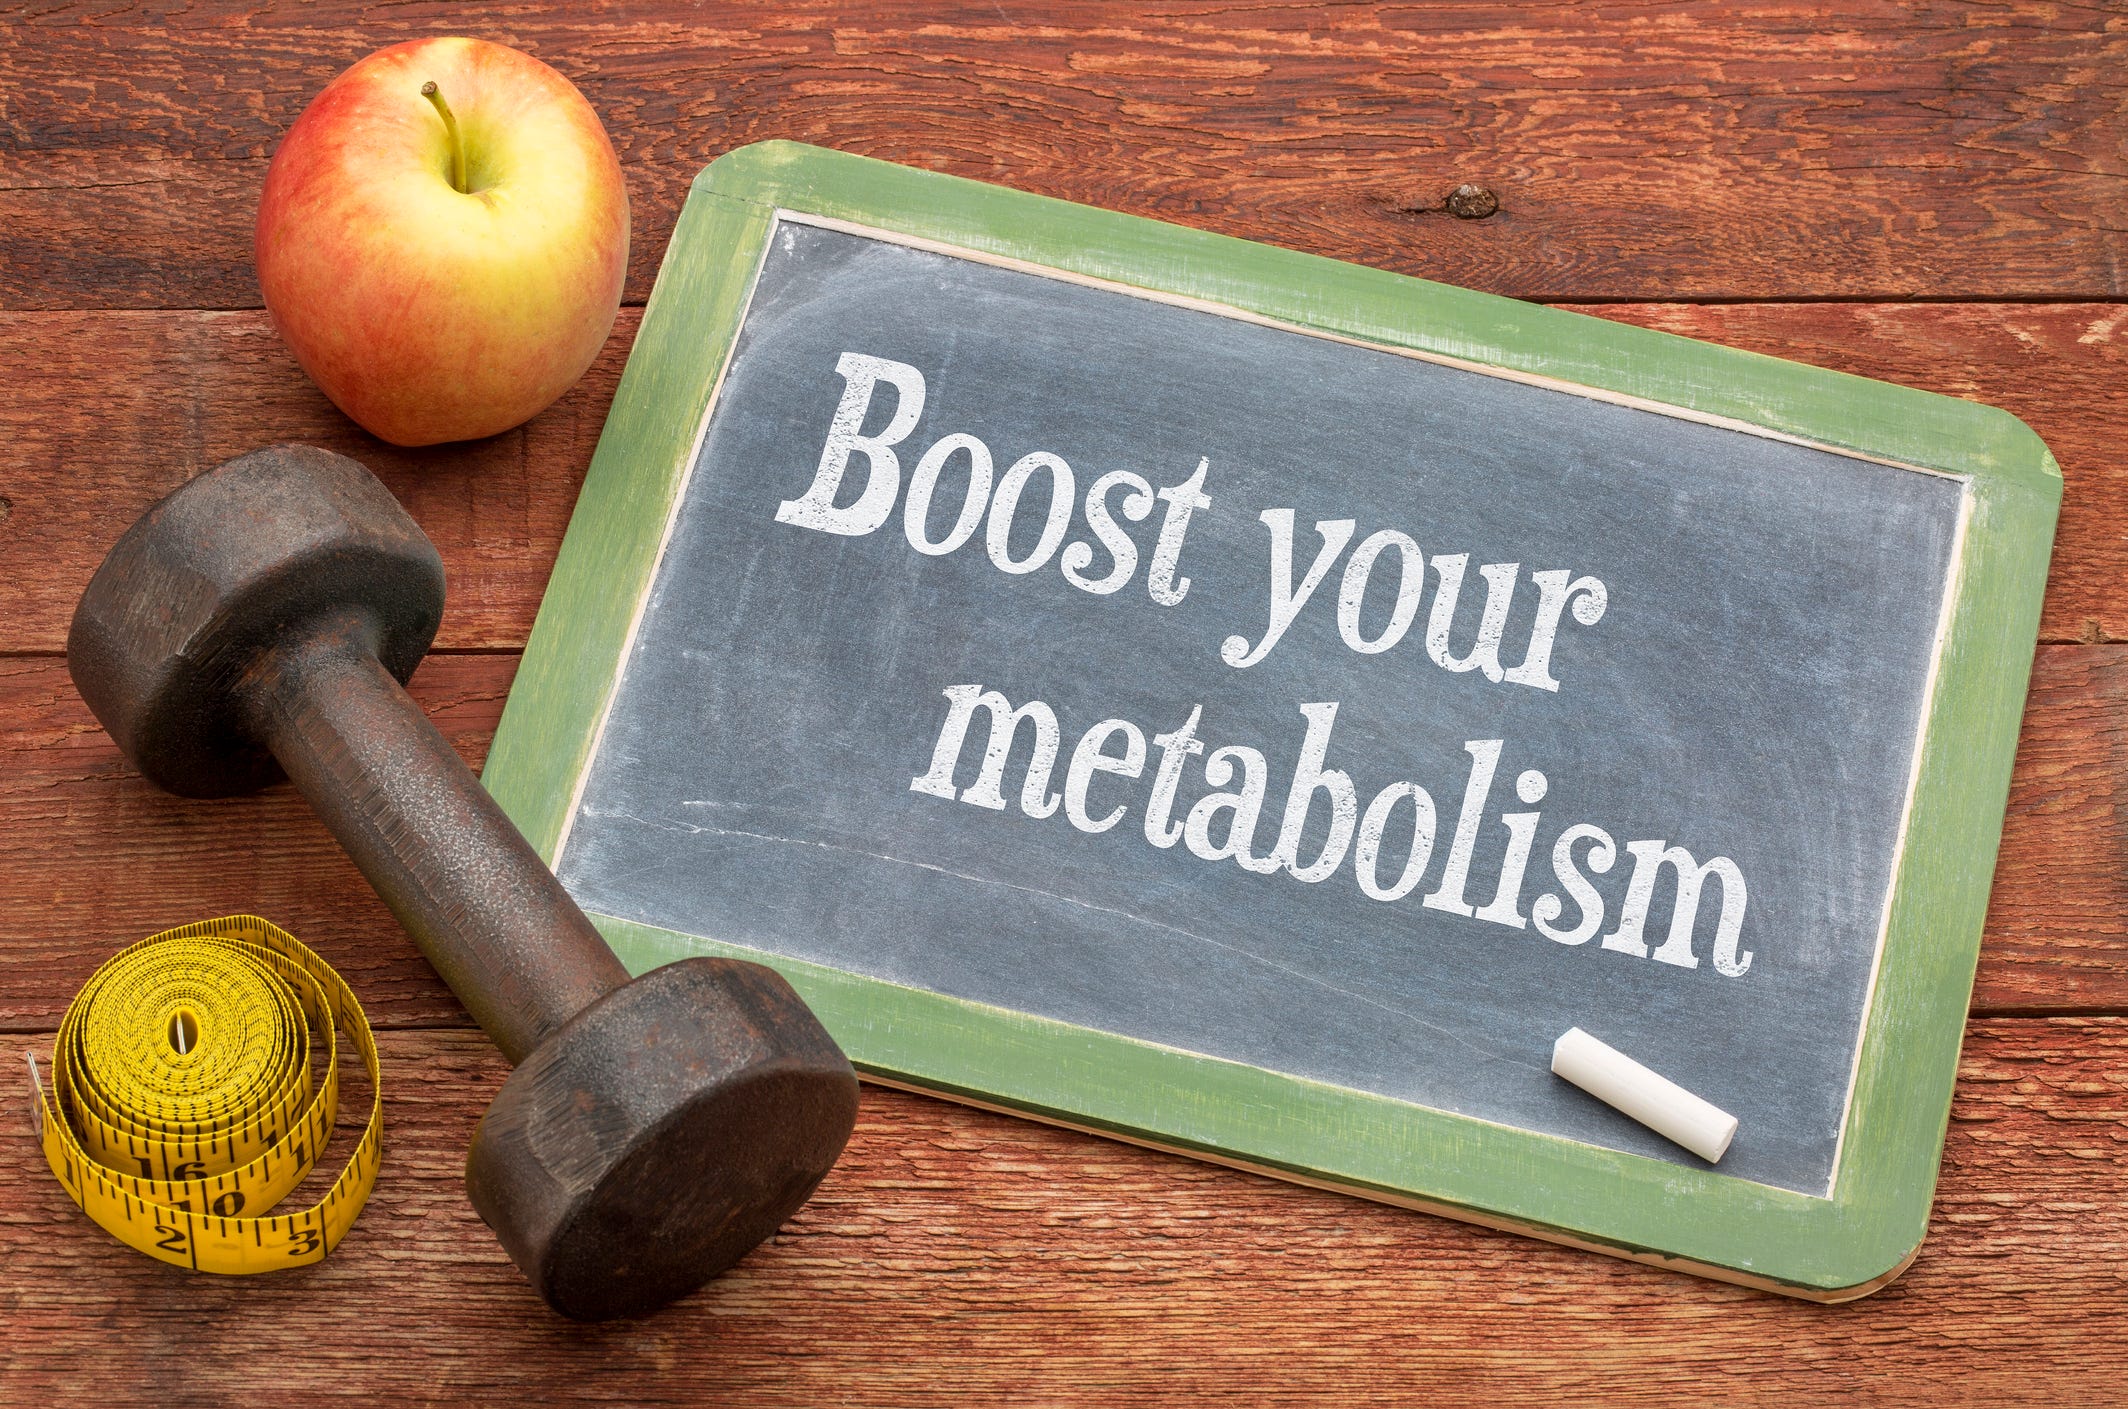 Sign Boost your metabolism